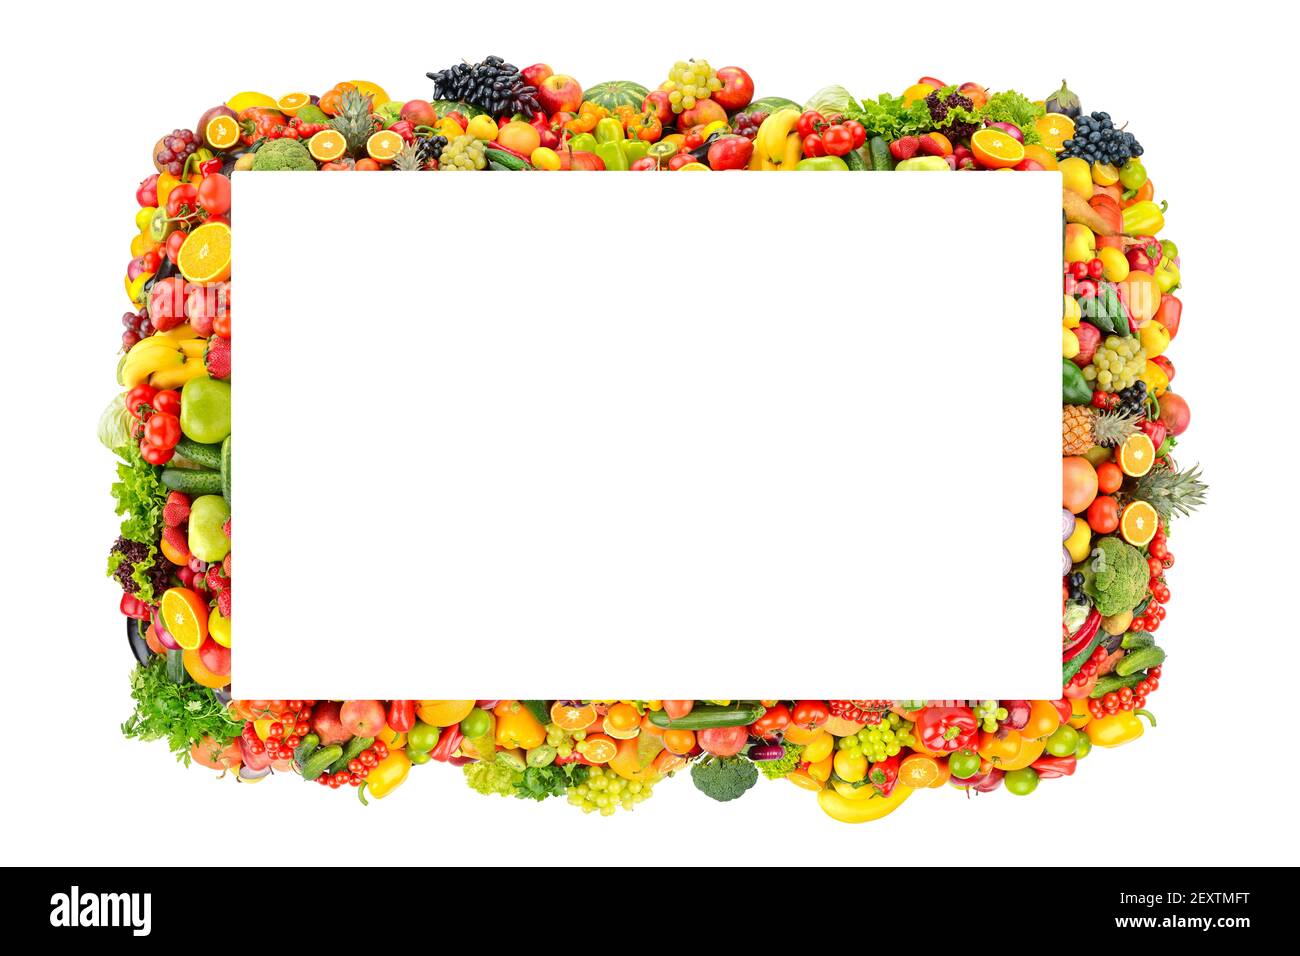 Beautiful frame fruits, vegetables, berries isolated on white background Stock Photo